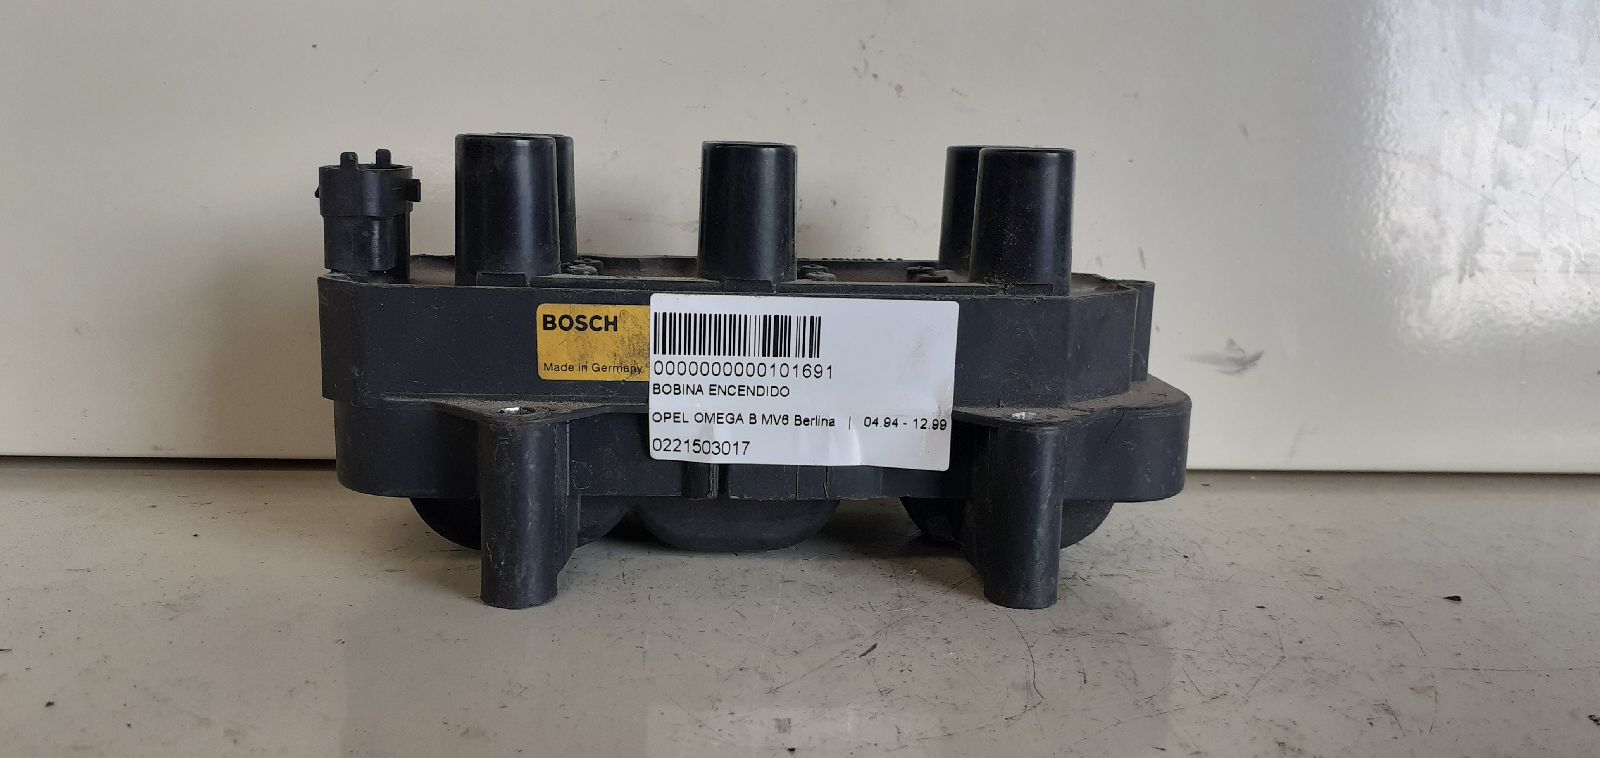 OPEL Omega B (1994-2003) High Voltage Ignition Coil 0221503017 25280823